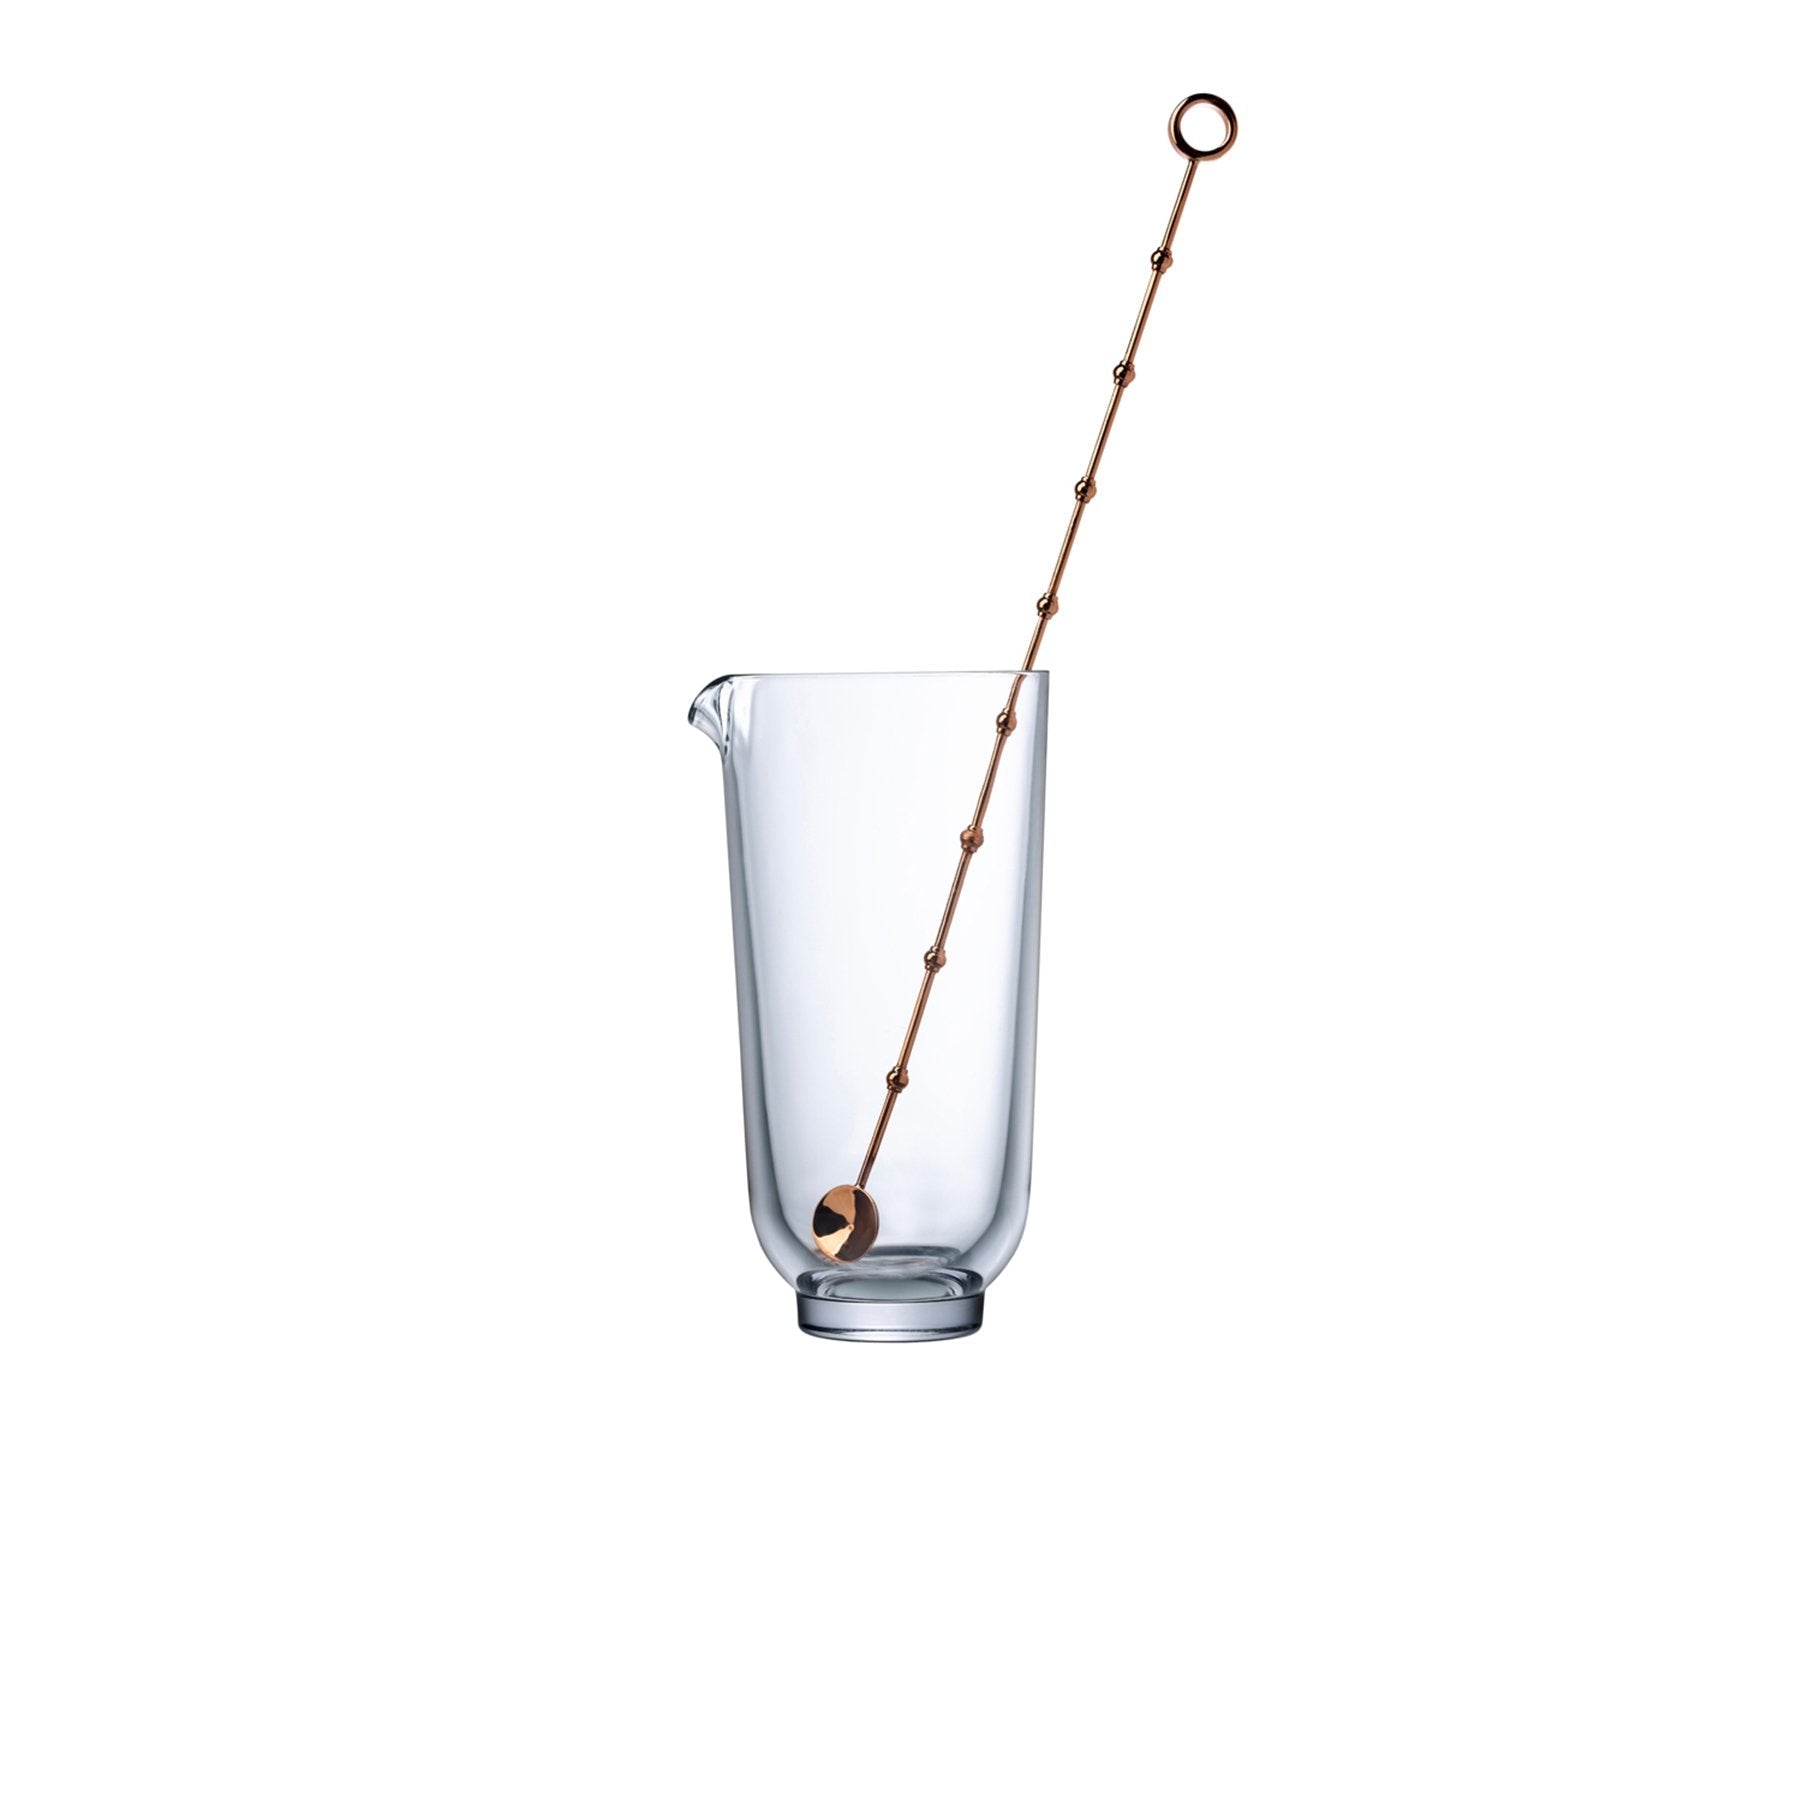 hepburn mixing glass with metal stirrer by nude at adorn.house